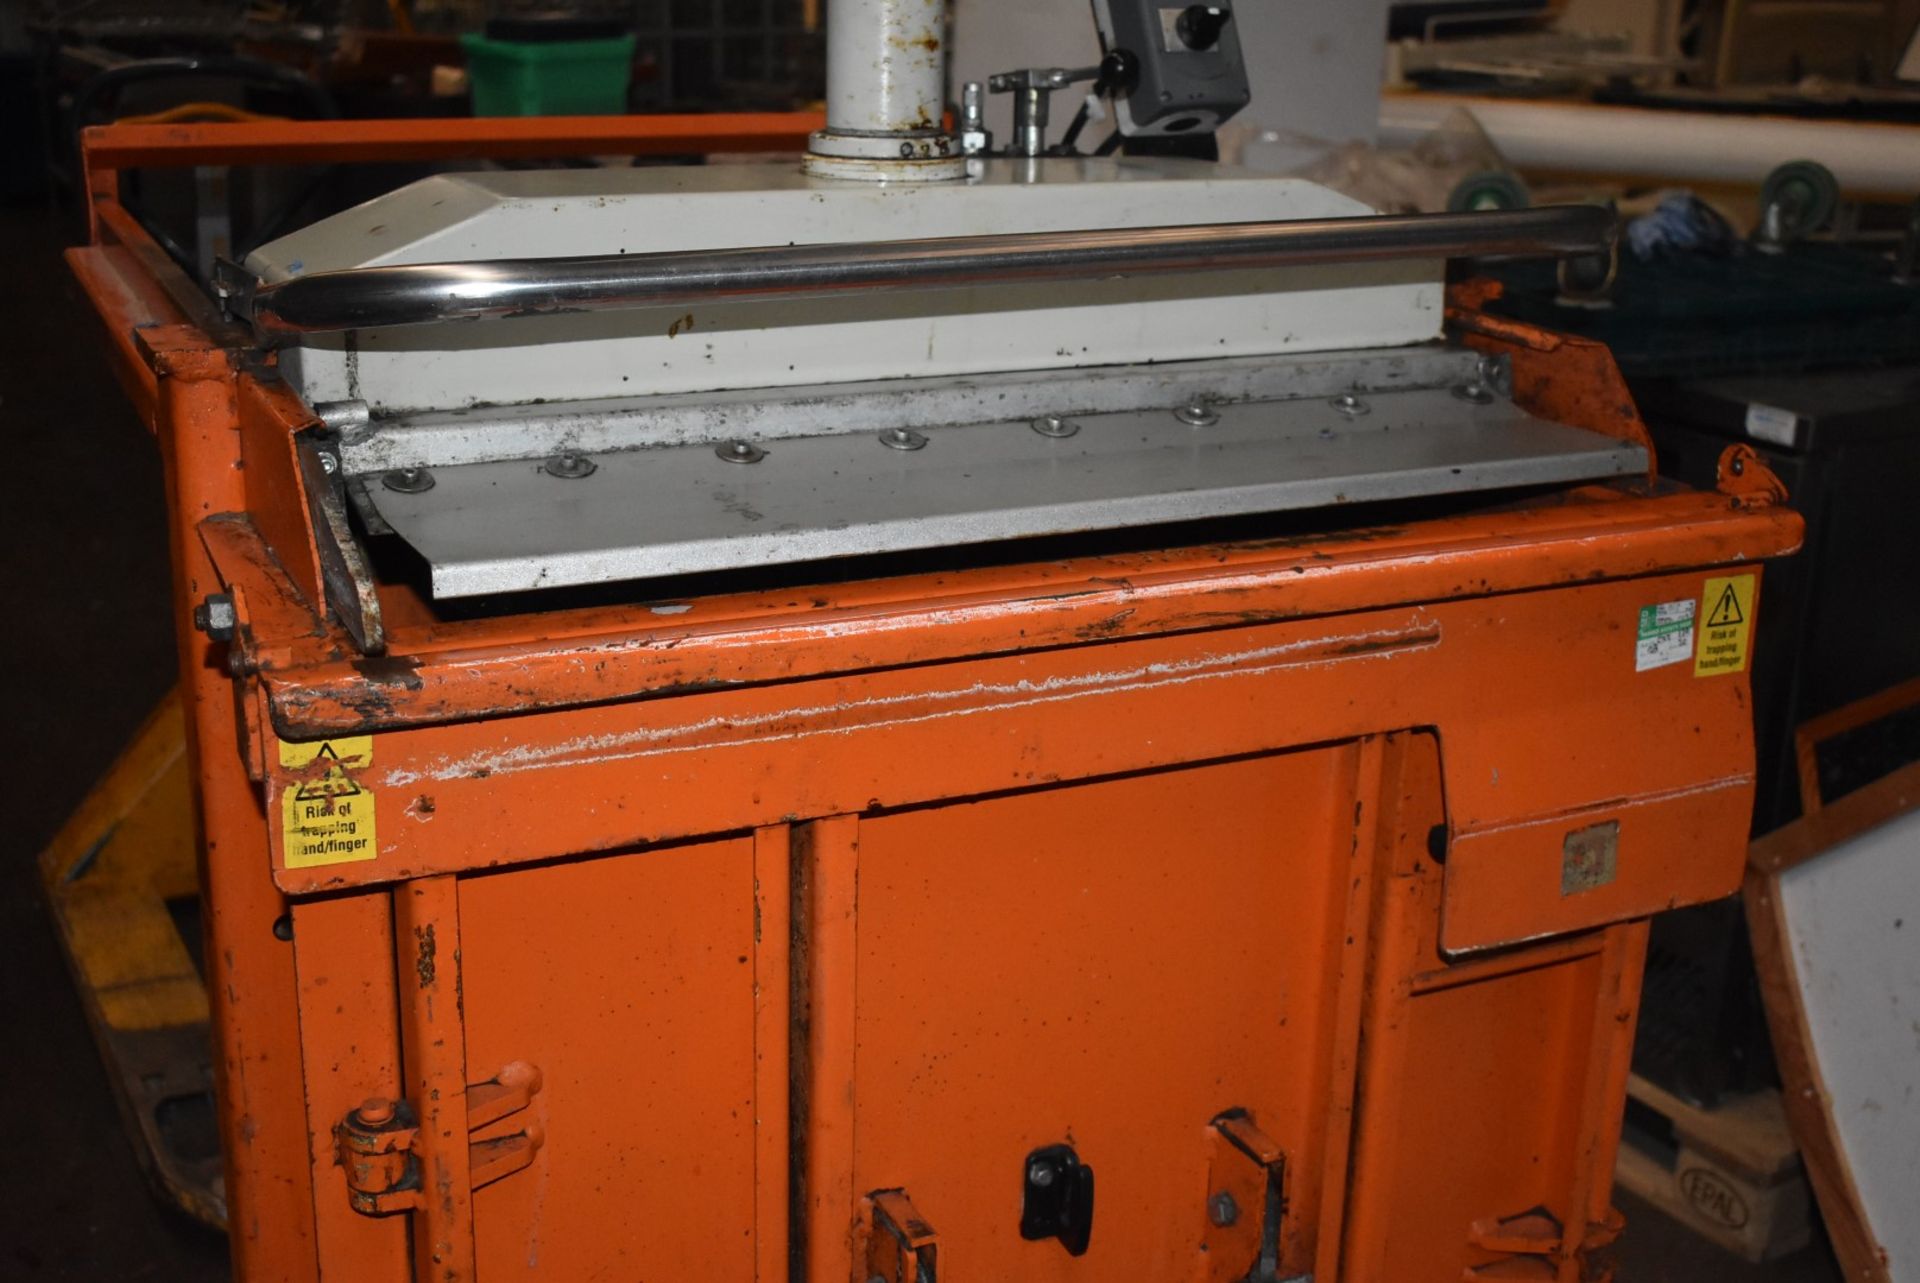 1 x Orwak 5010 Hydraulic Press Compact Cardboard Baler - Used For Compacting Recyclable or Non- - Image 2 of 15